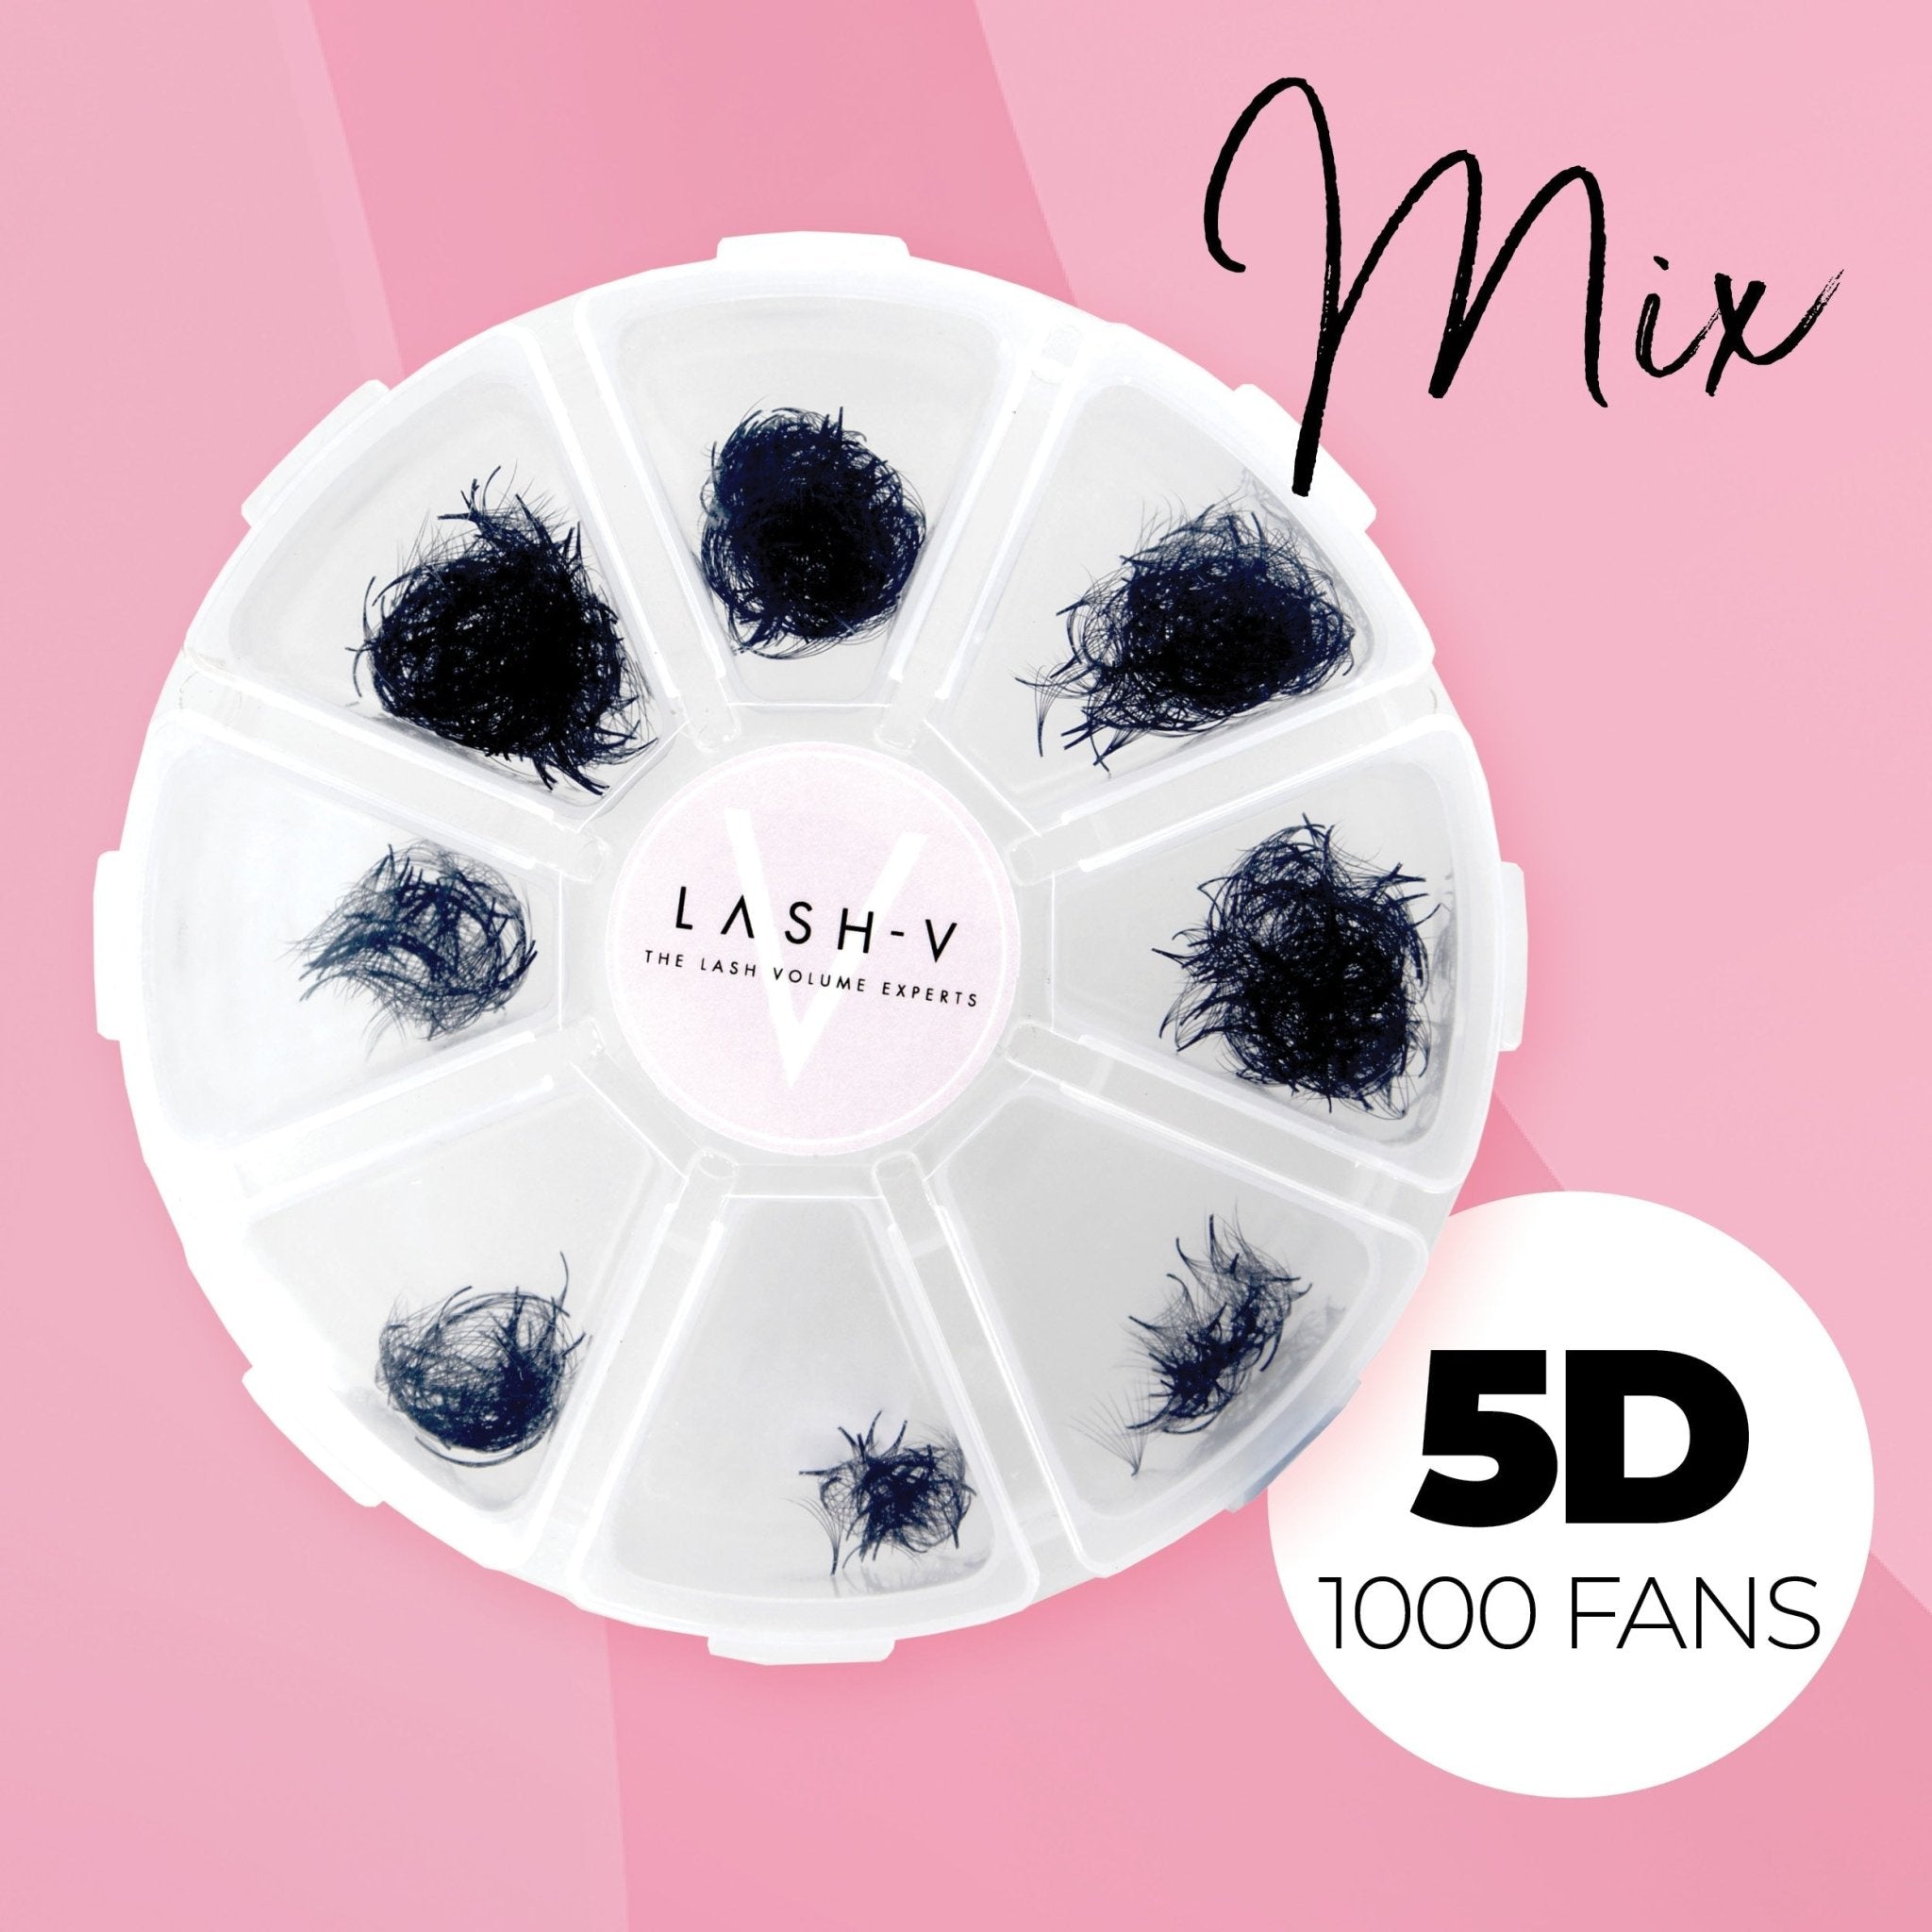 5D Promade Loose - 1000 Mix Fans - One V Salon